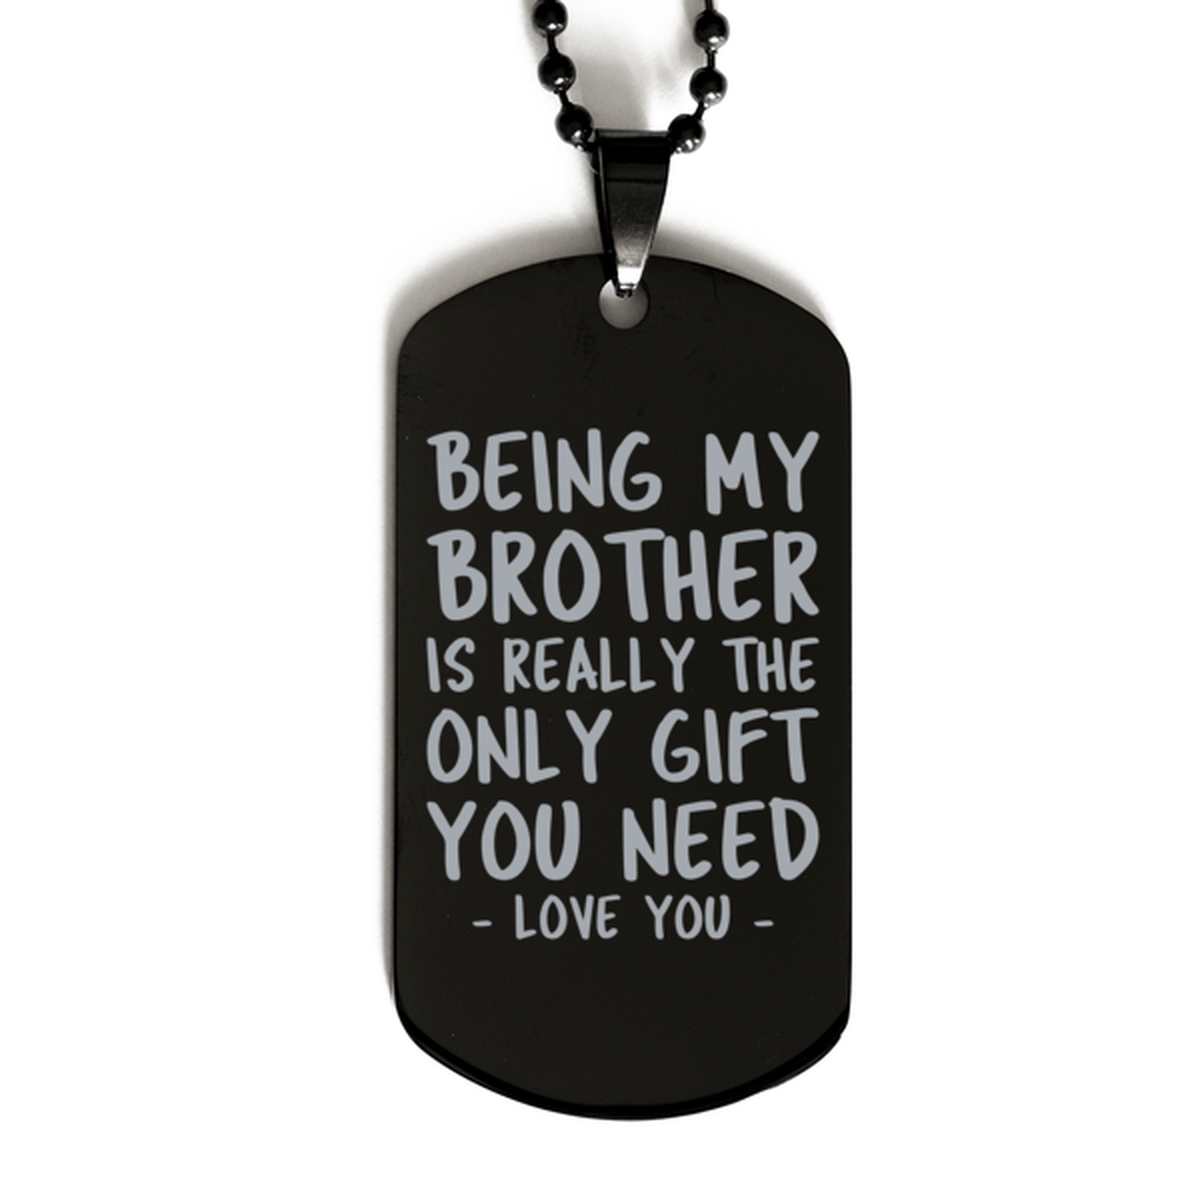 Funny Brother Black Dog Tag Necklace, Being My Brother Is Really the Only Gift You Need, Best Birthday Gifts for Brother